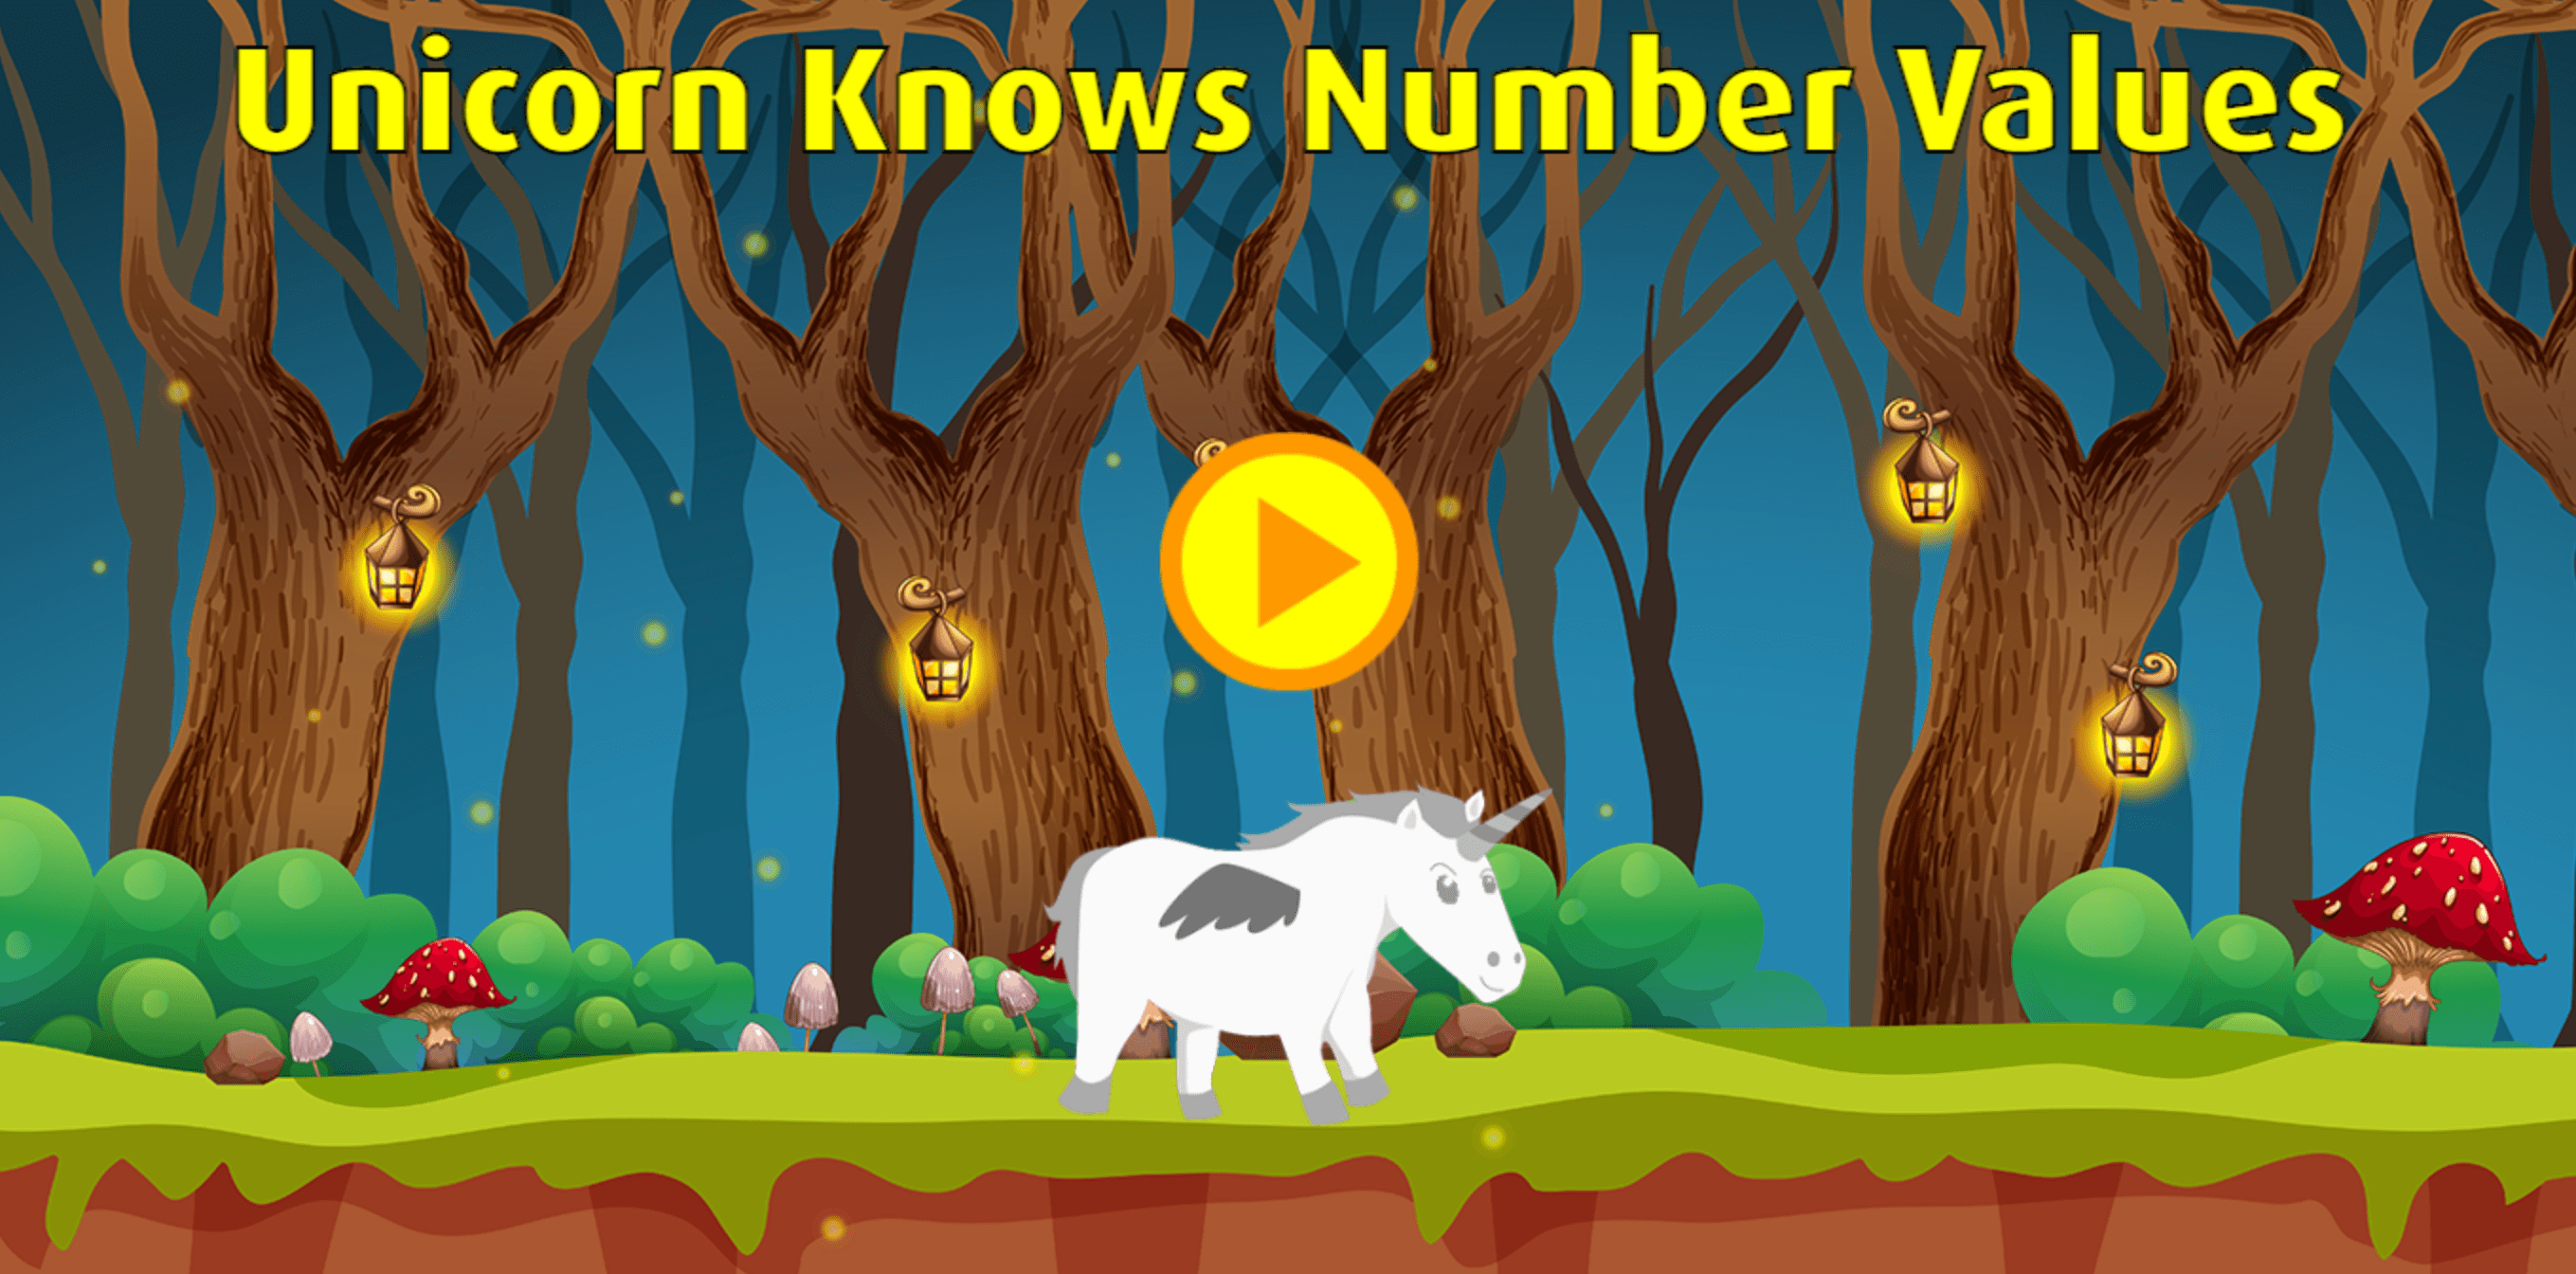 Title screen of a game featuring a unicorn in a forest setting and a yellow play button.